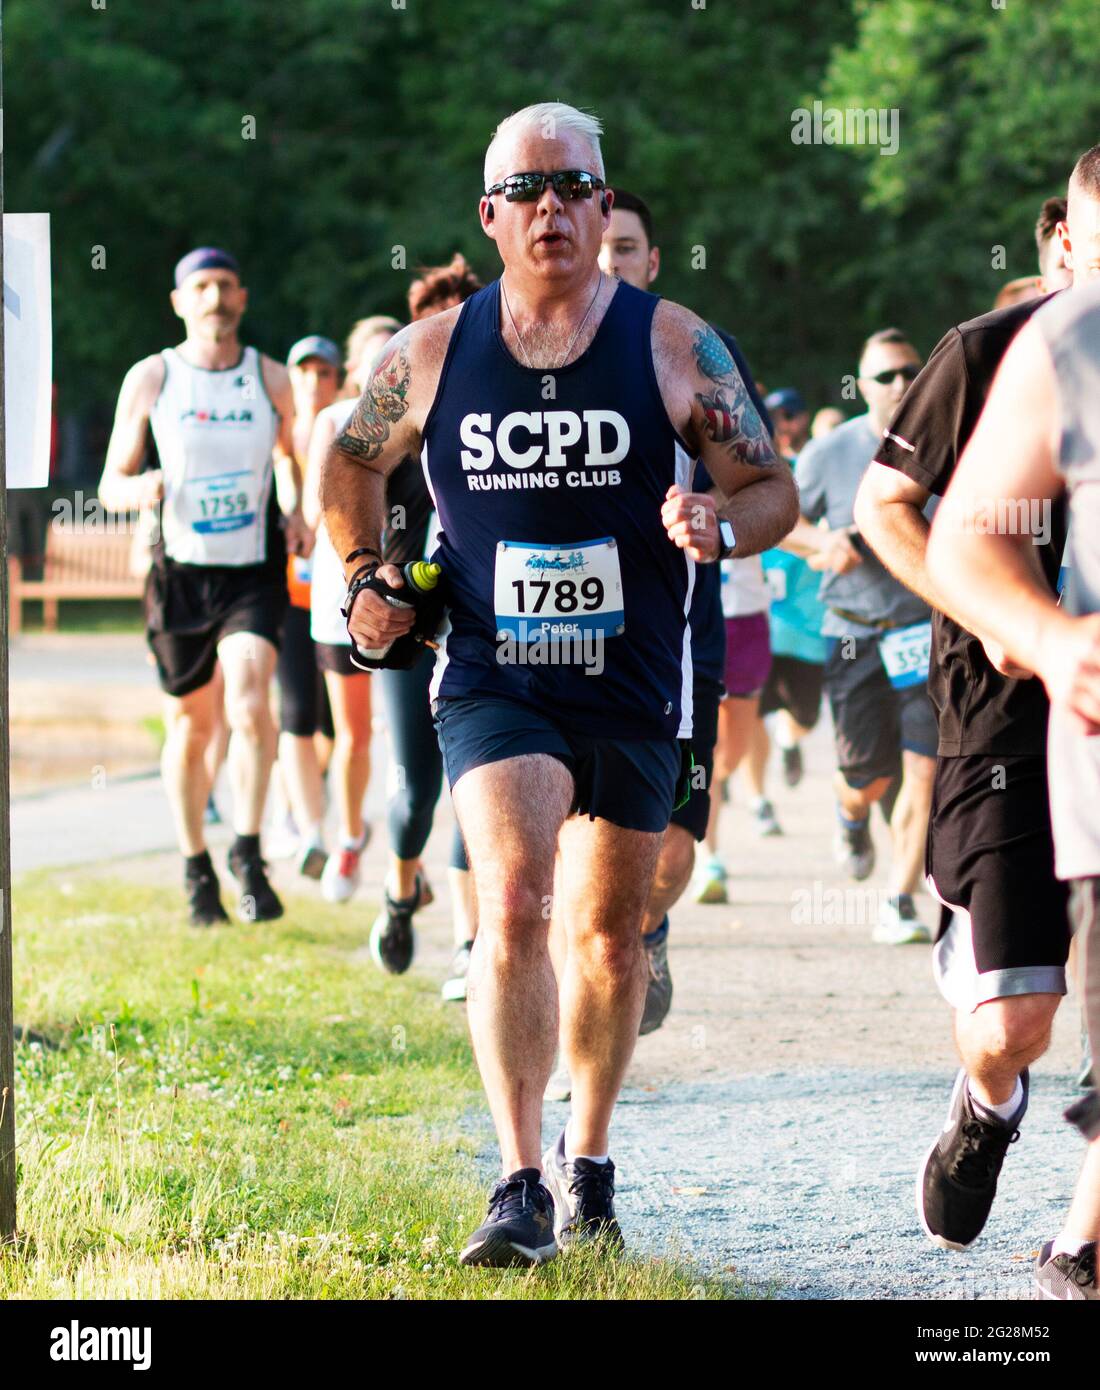 North Babylon, New York, USA – 8 July 2019: A member of the Suffolk County Police Department running club running a 5K race at Belmont Lake State Park Stock Photo